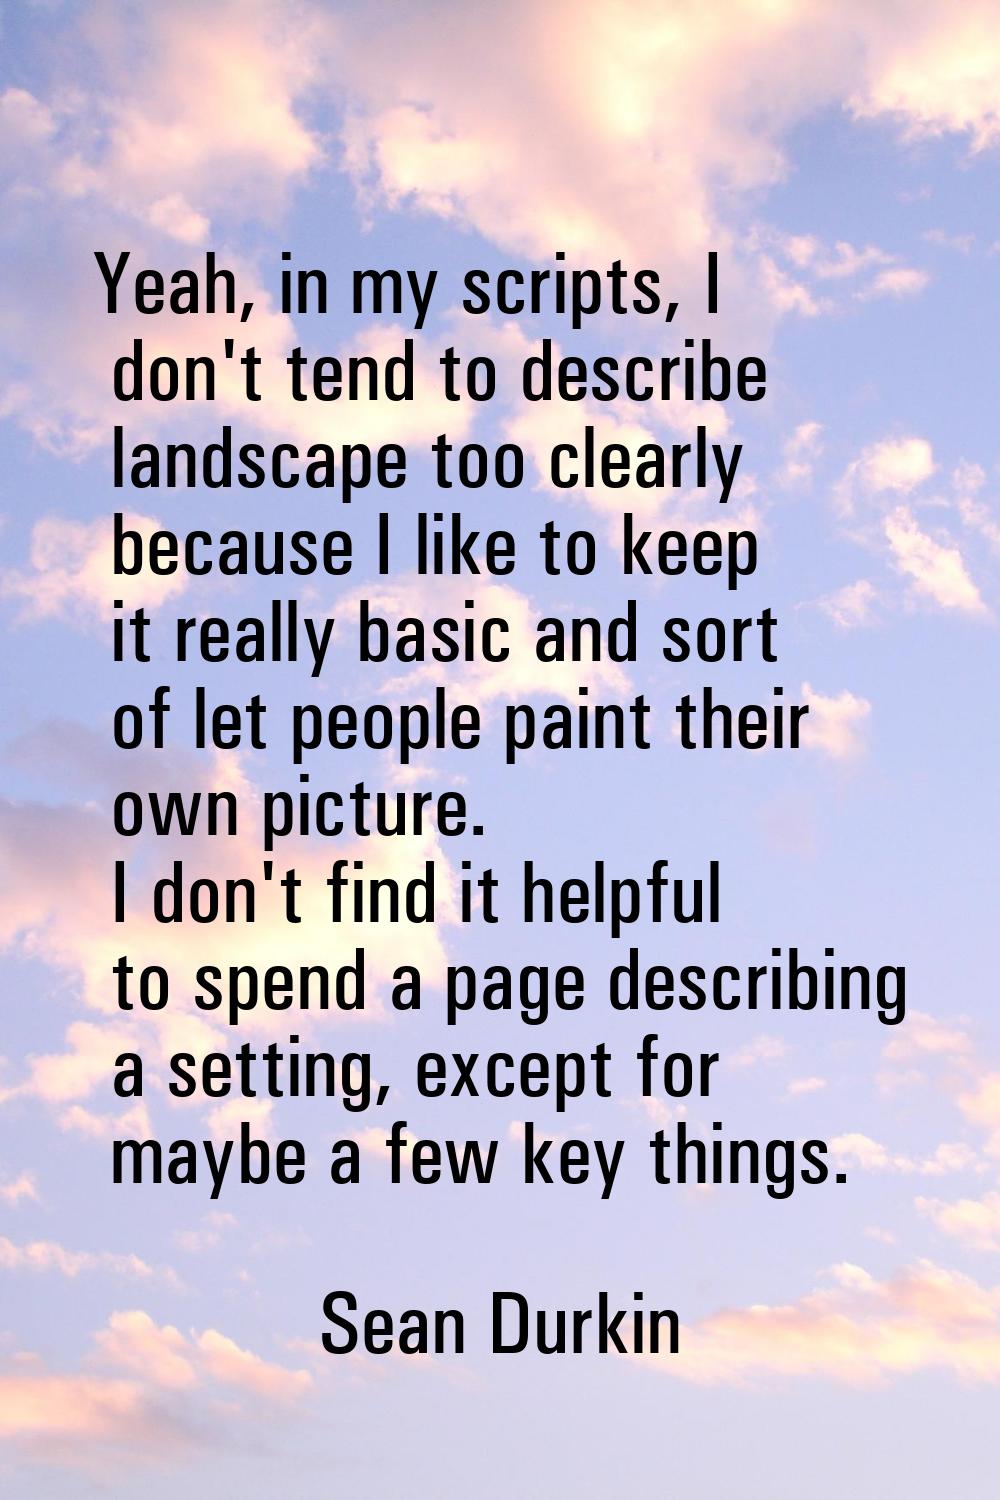 Yeah, in my scripts, I don't tend to describe landscape too clearly because I like to keep it reall